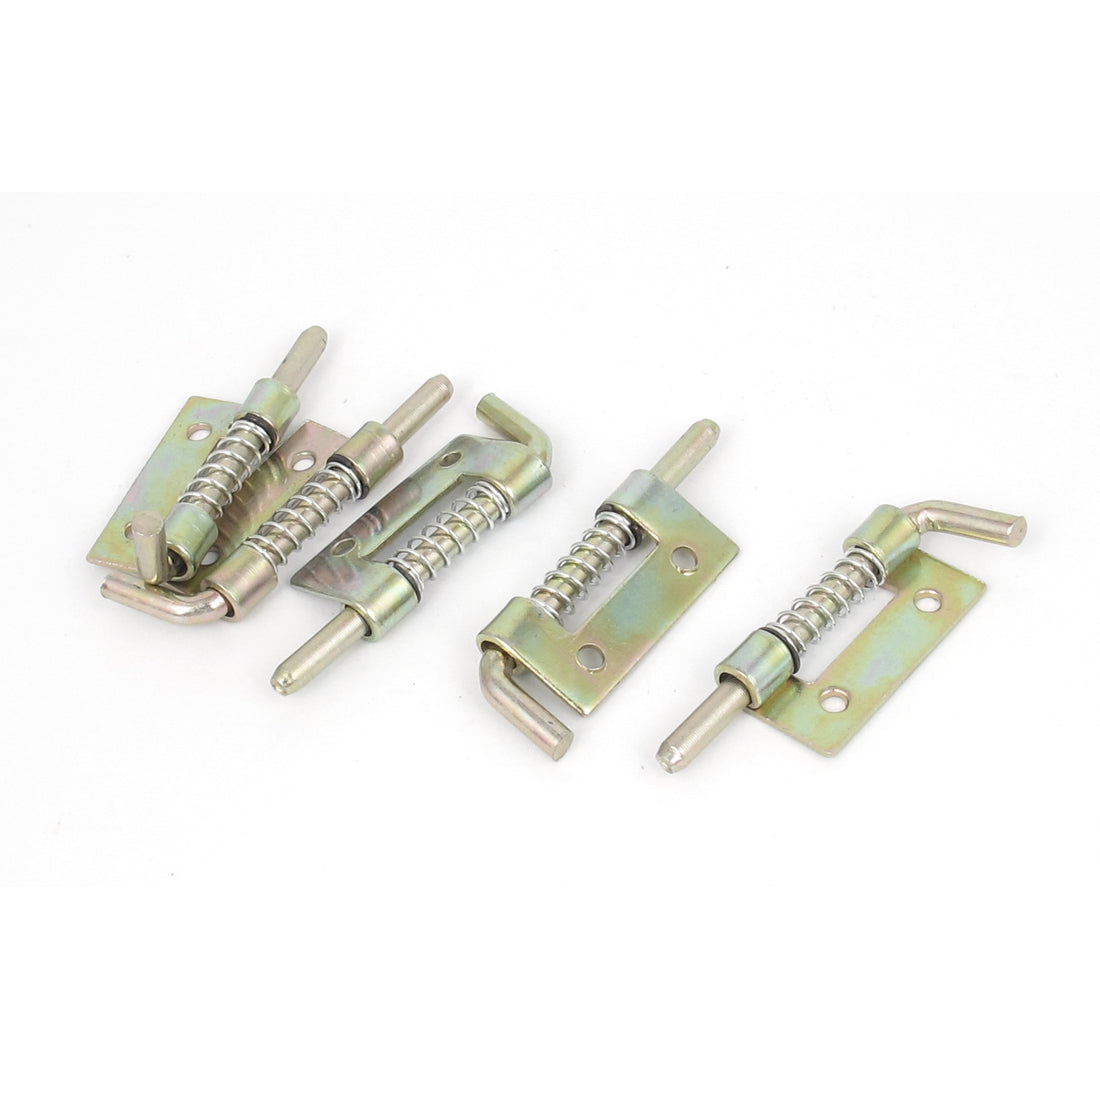 uxcell Uxcell 5pcs Bronze Tone Metal Locked Right-handed Spring Loaded Bolt Latch for Gate Door